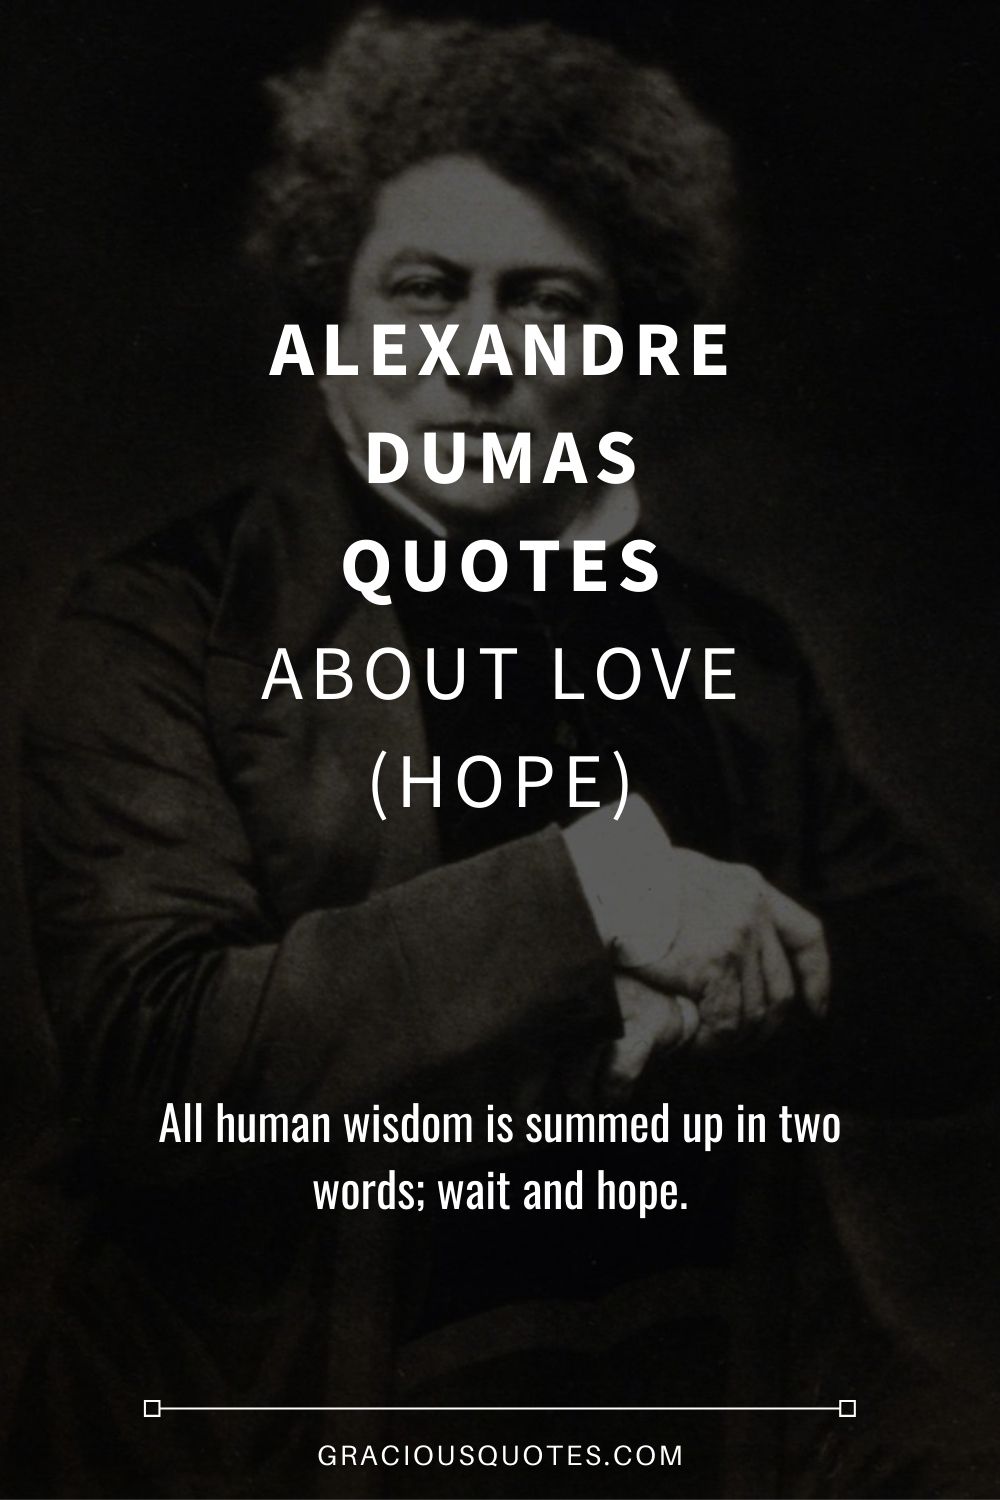 Alexandre Dumas Quotes About Love (HOPE) - Gracious Quotes